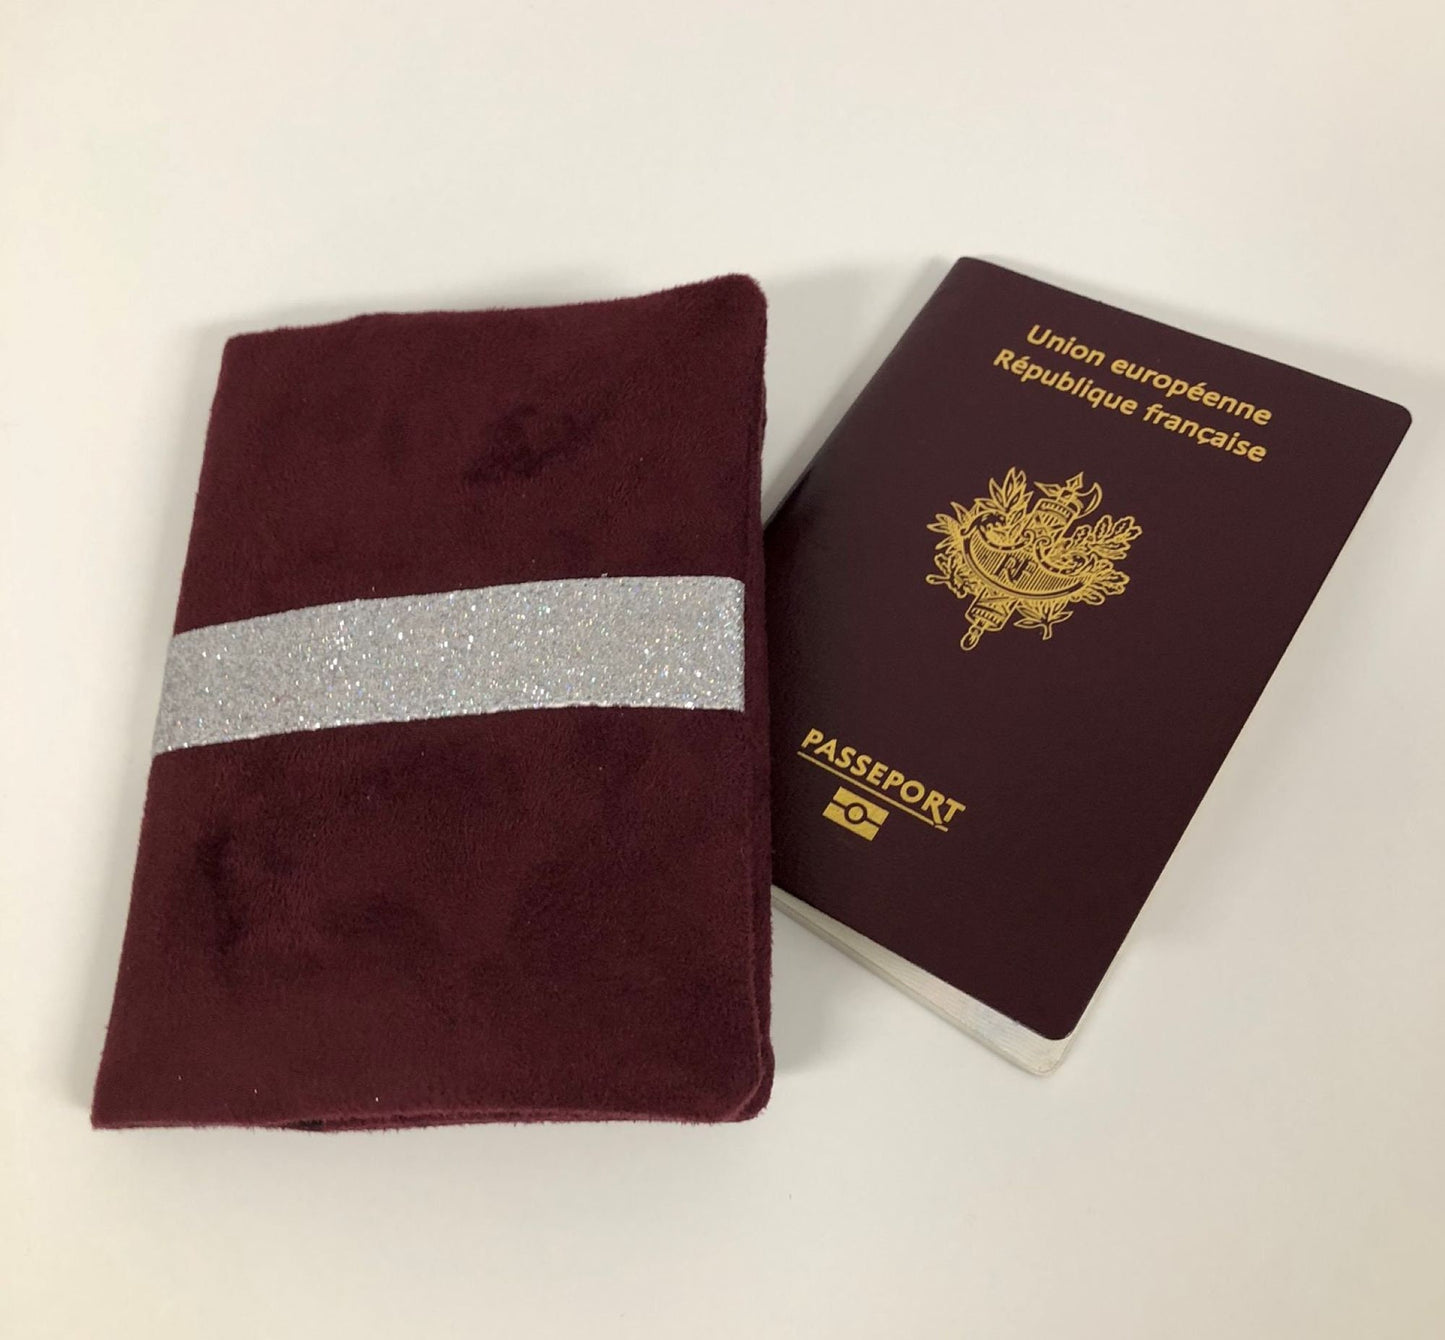 Burgundy passport cover with silver sequins